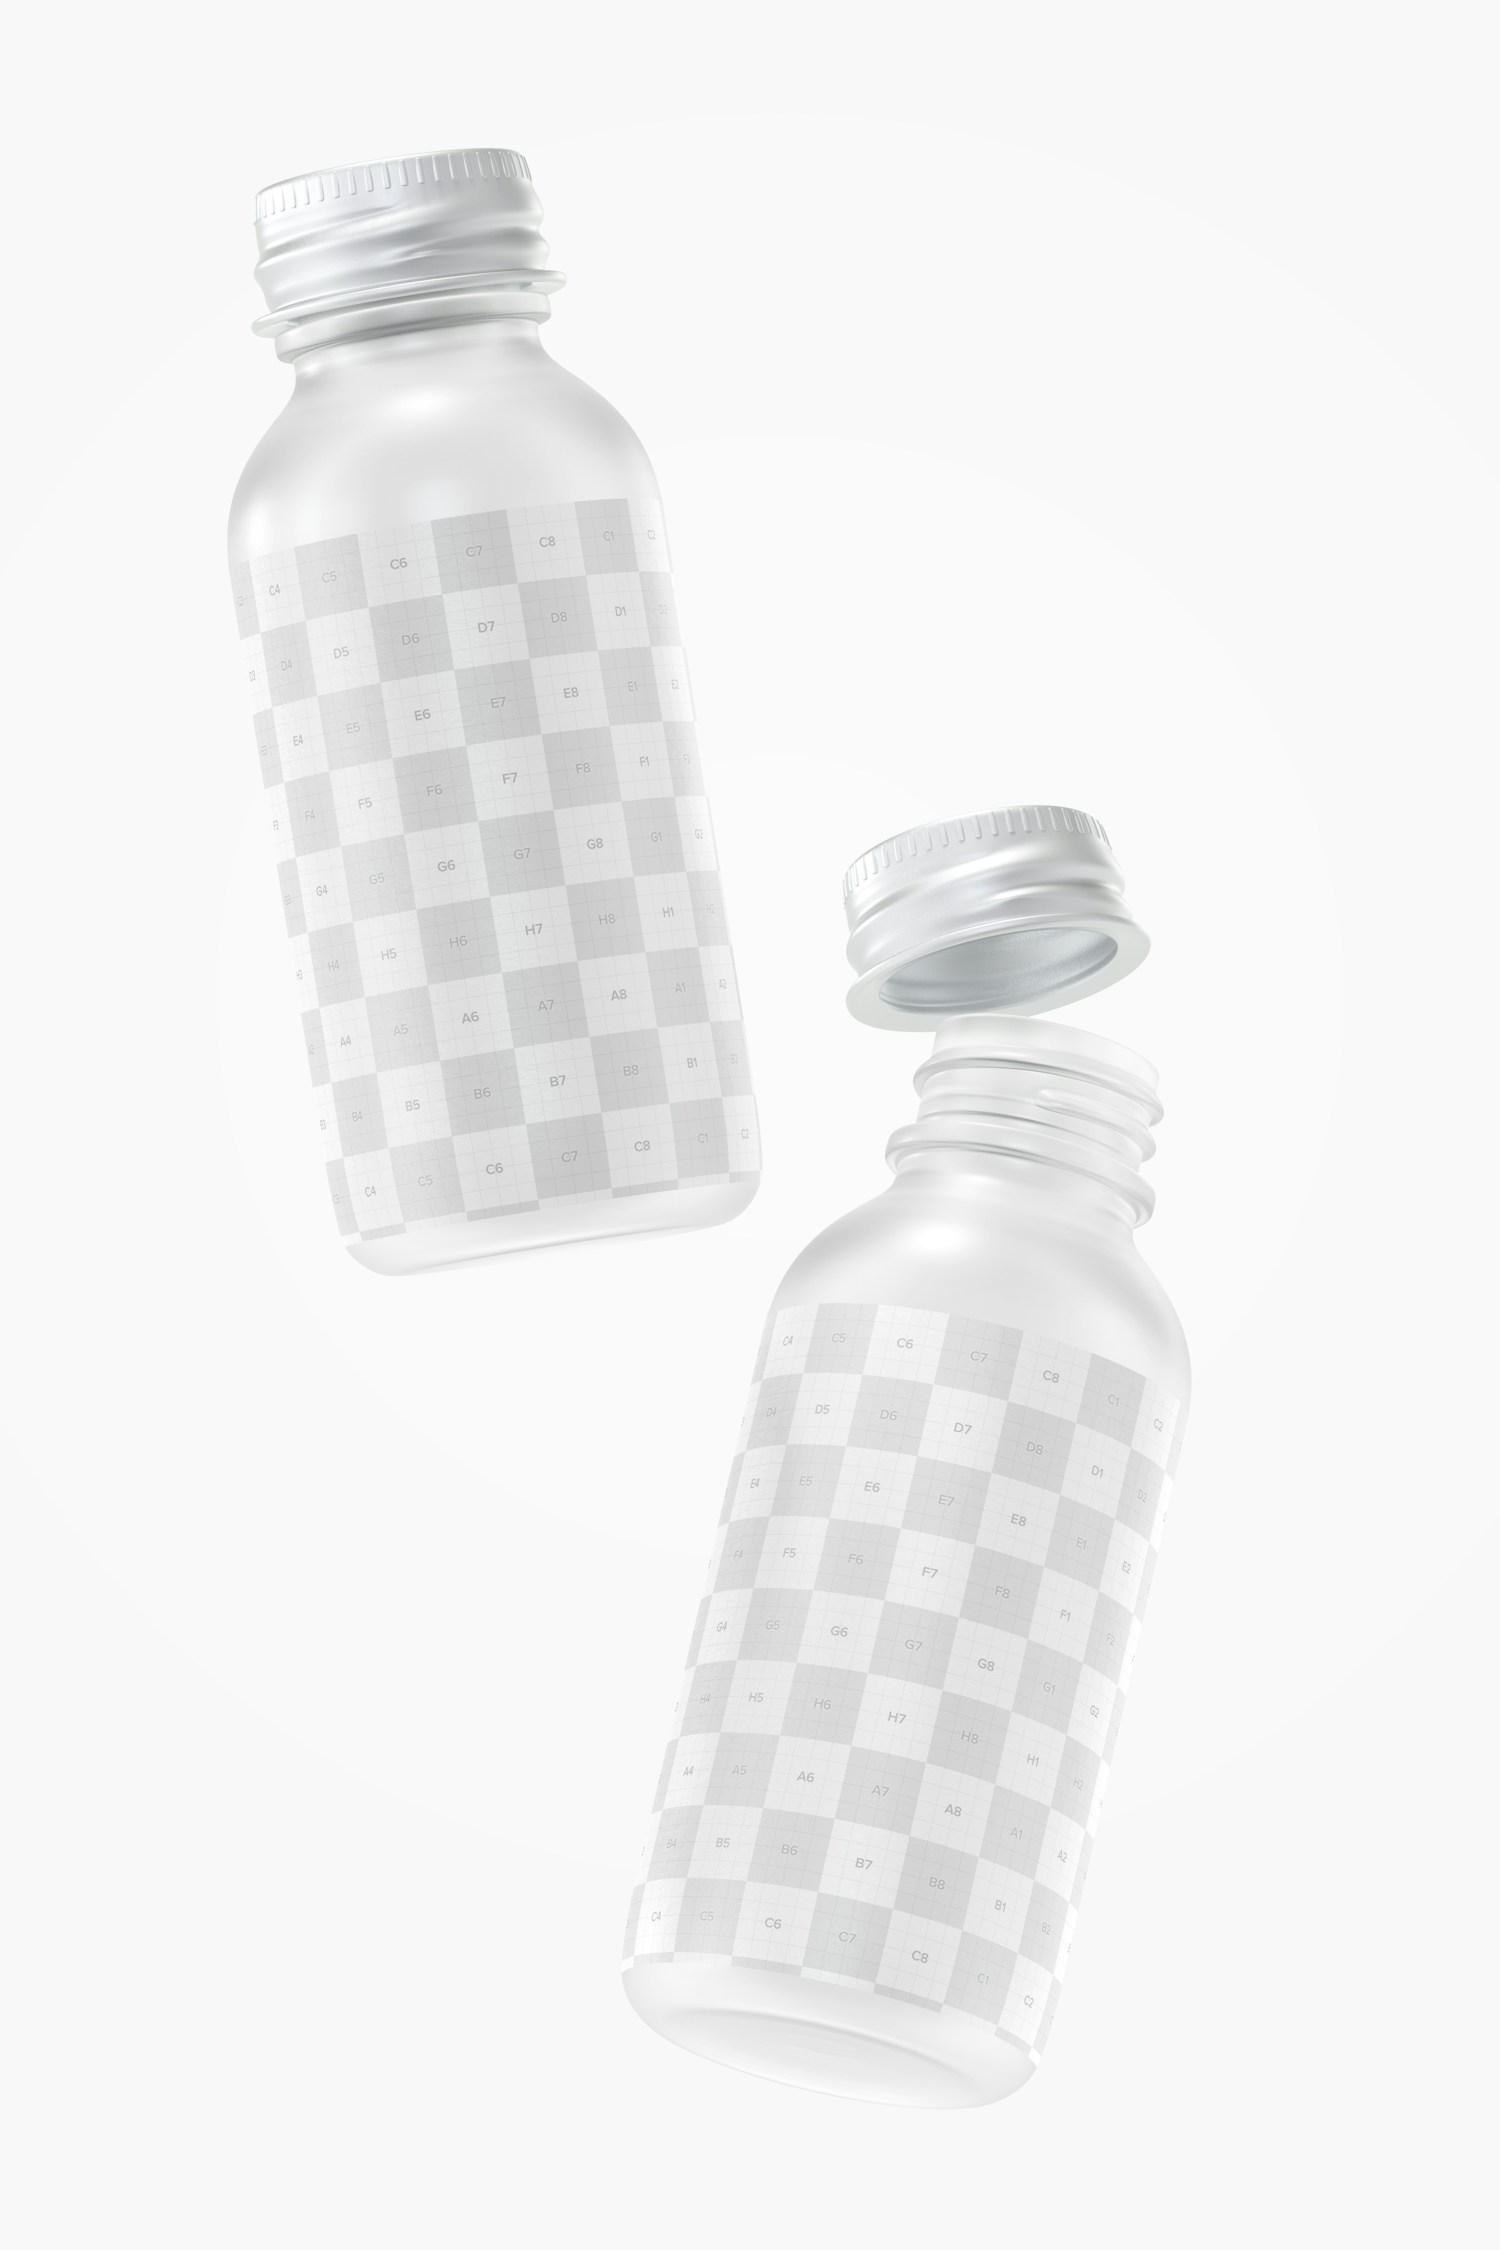 1 oz Frosted Glass Round Bottles Mockup, Falling